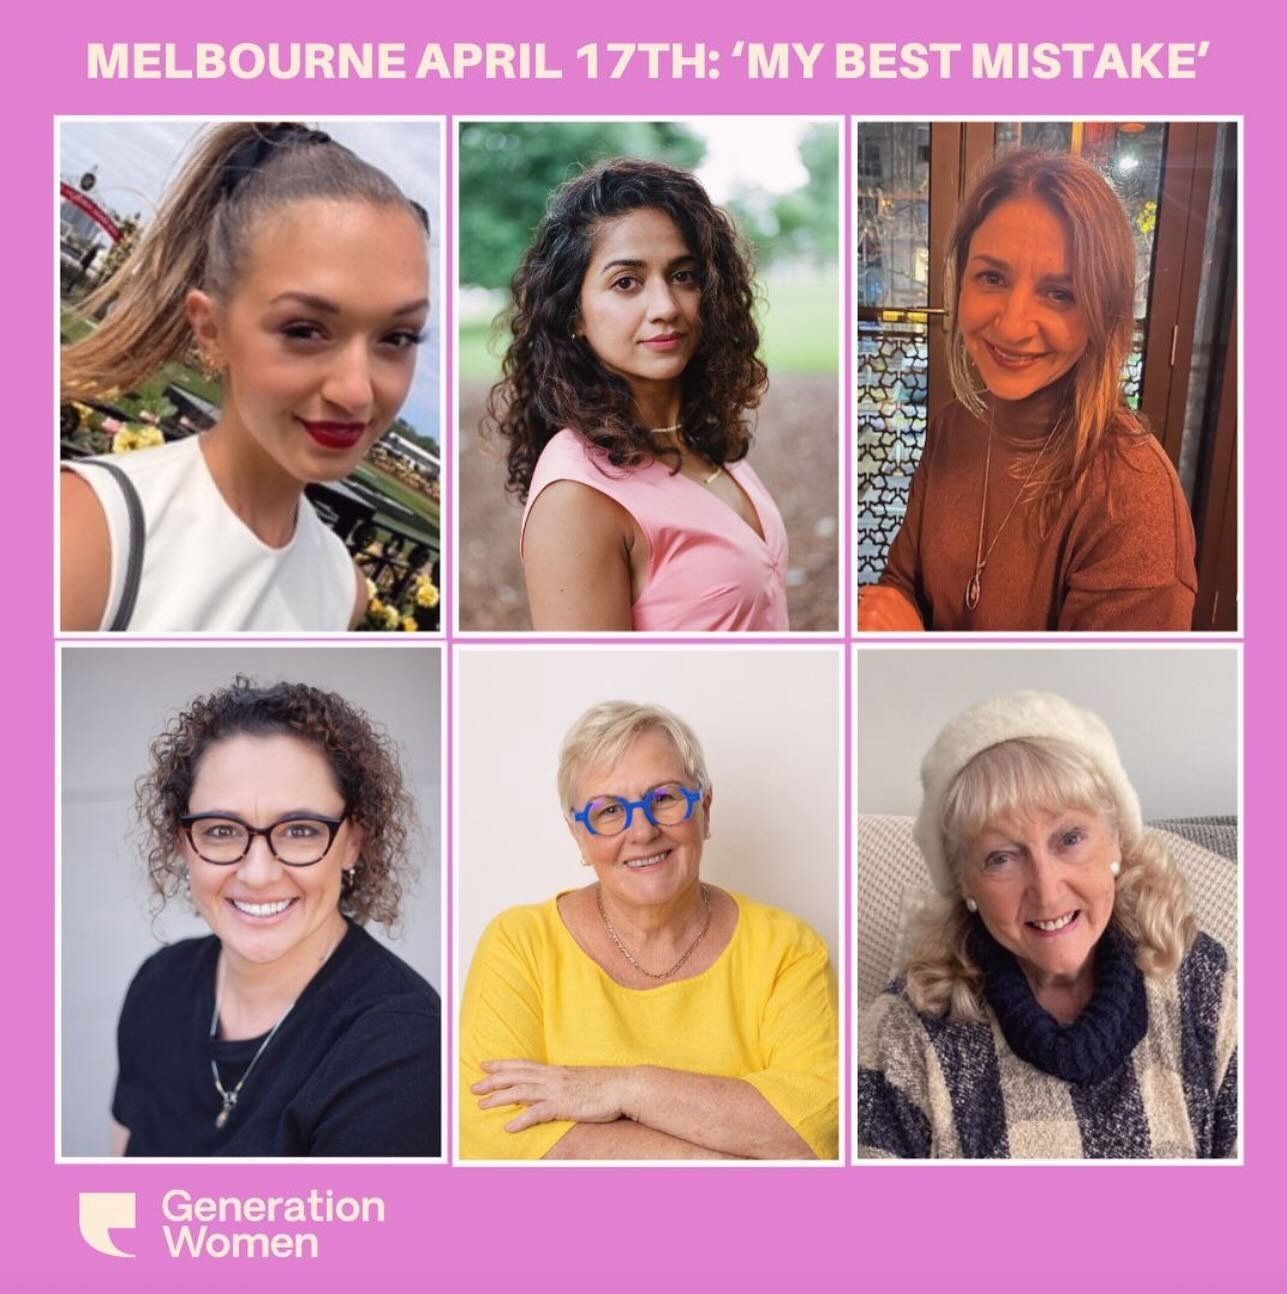 🌟 Exciting News! 🌟 Join us on THIS Wednesday April 17th for an unforgettable evening of cross-generational storytelling at Generation Women Melbourne!

Theme: My Best Mistake- Mistakes are inevitable, but sometimes a misstep can take us down the ri